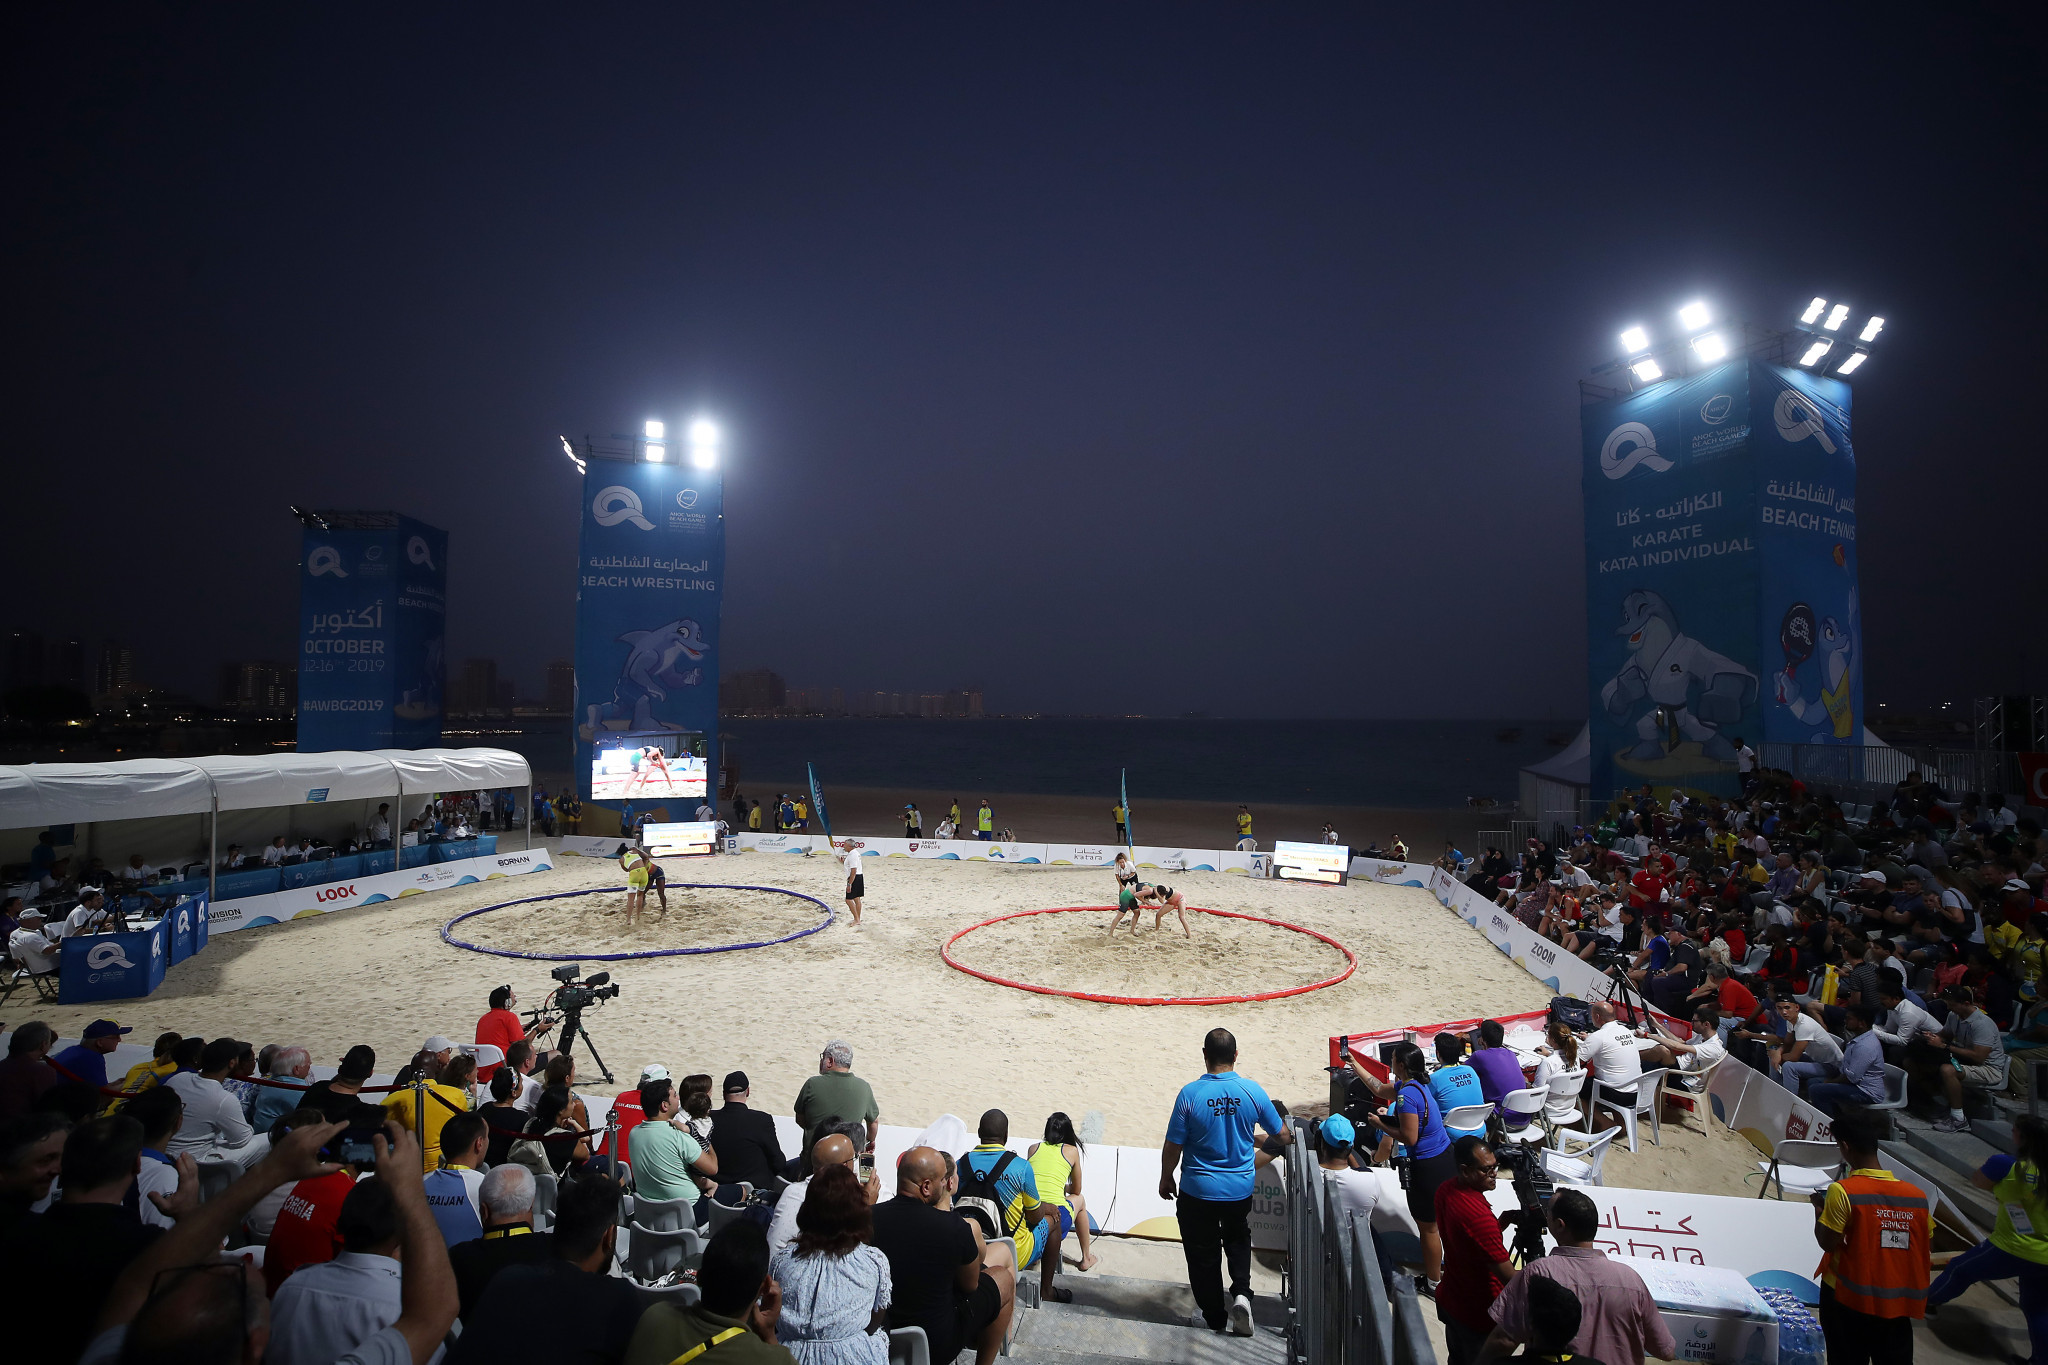 Two positive doping cases involved beach wrestlers at the ANOC World Beach Games ©ANOC